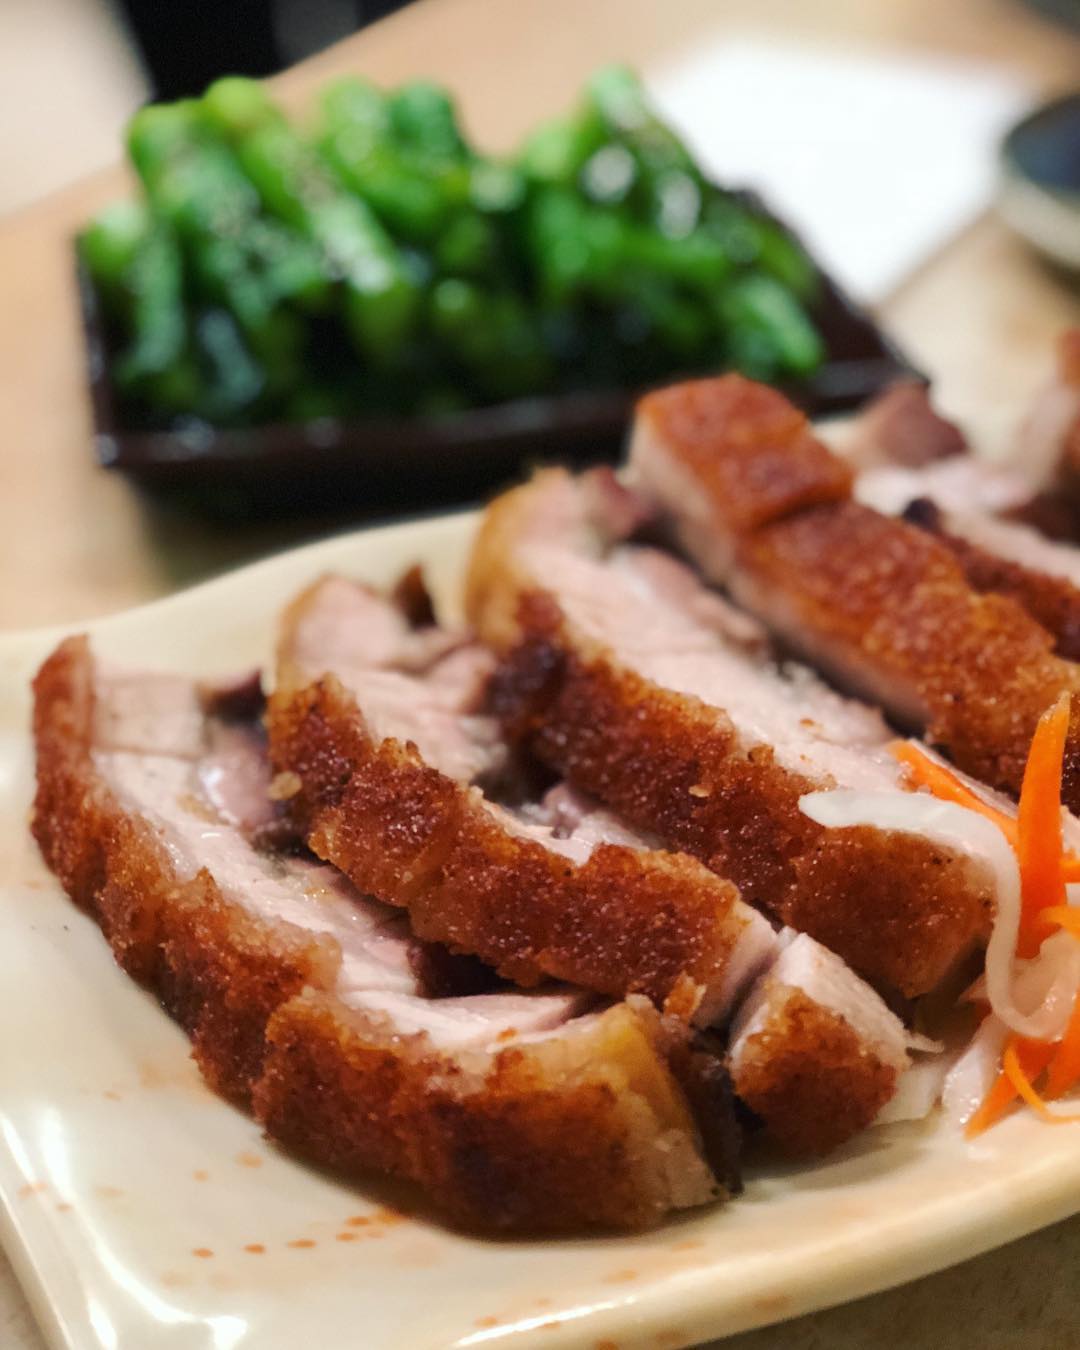 Crispy pork belly and Chinese broccoli for dinner this evening.. I’m addicted… I can’t believe that fatty foods help me lose weight; it’s awesome